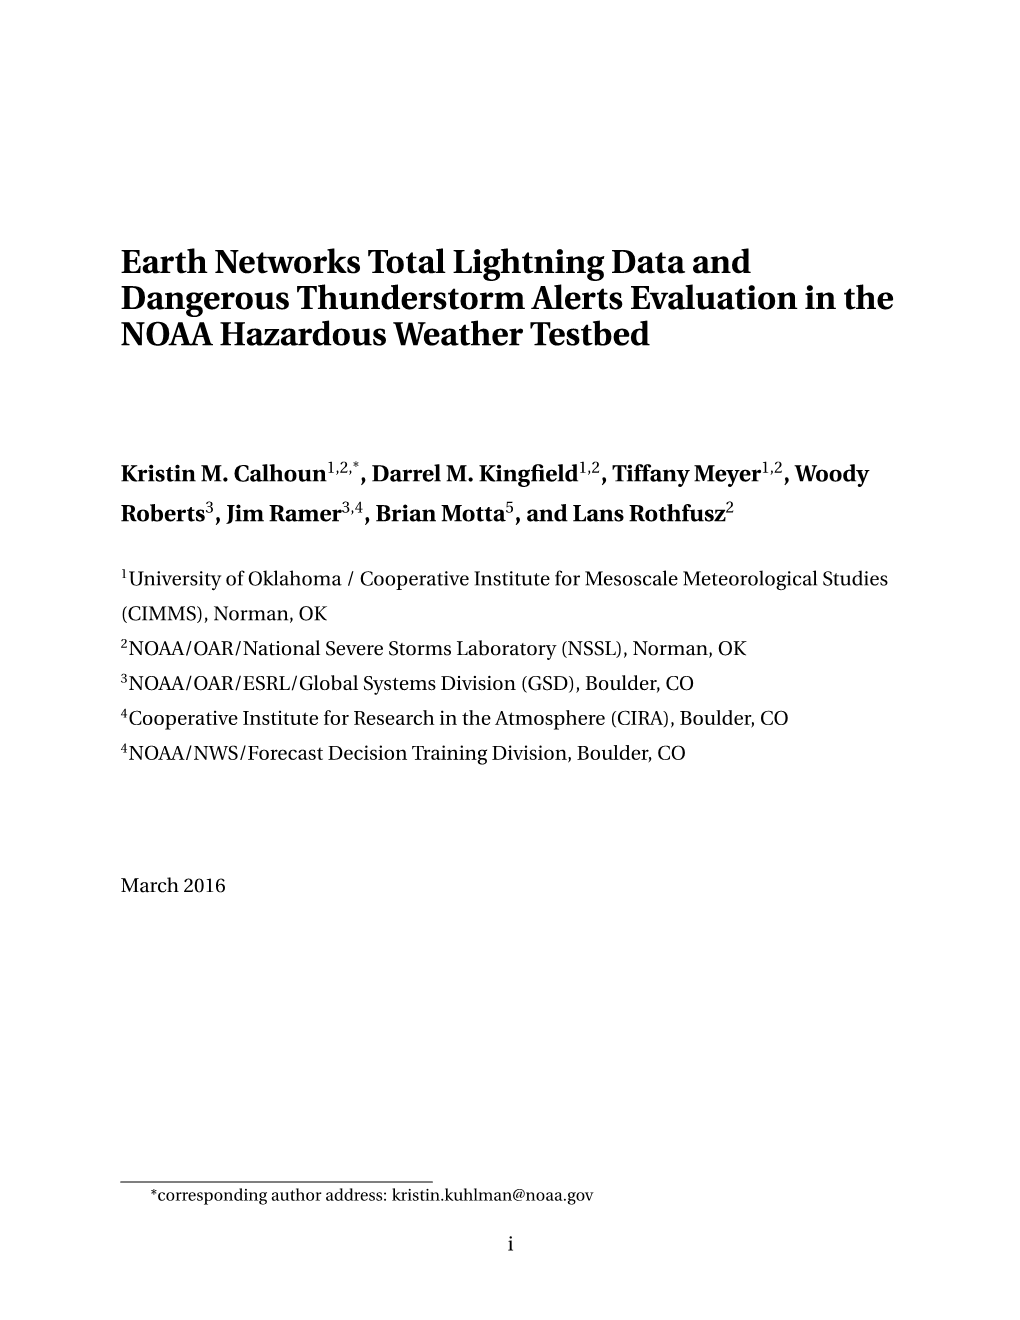 Earth Networks Total Lightning Data and Dangerous Thunderstorm Alerts Evaluation in the NOAA Hazardous Weather Testbed